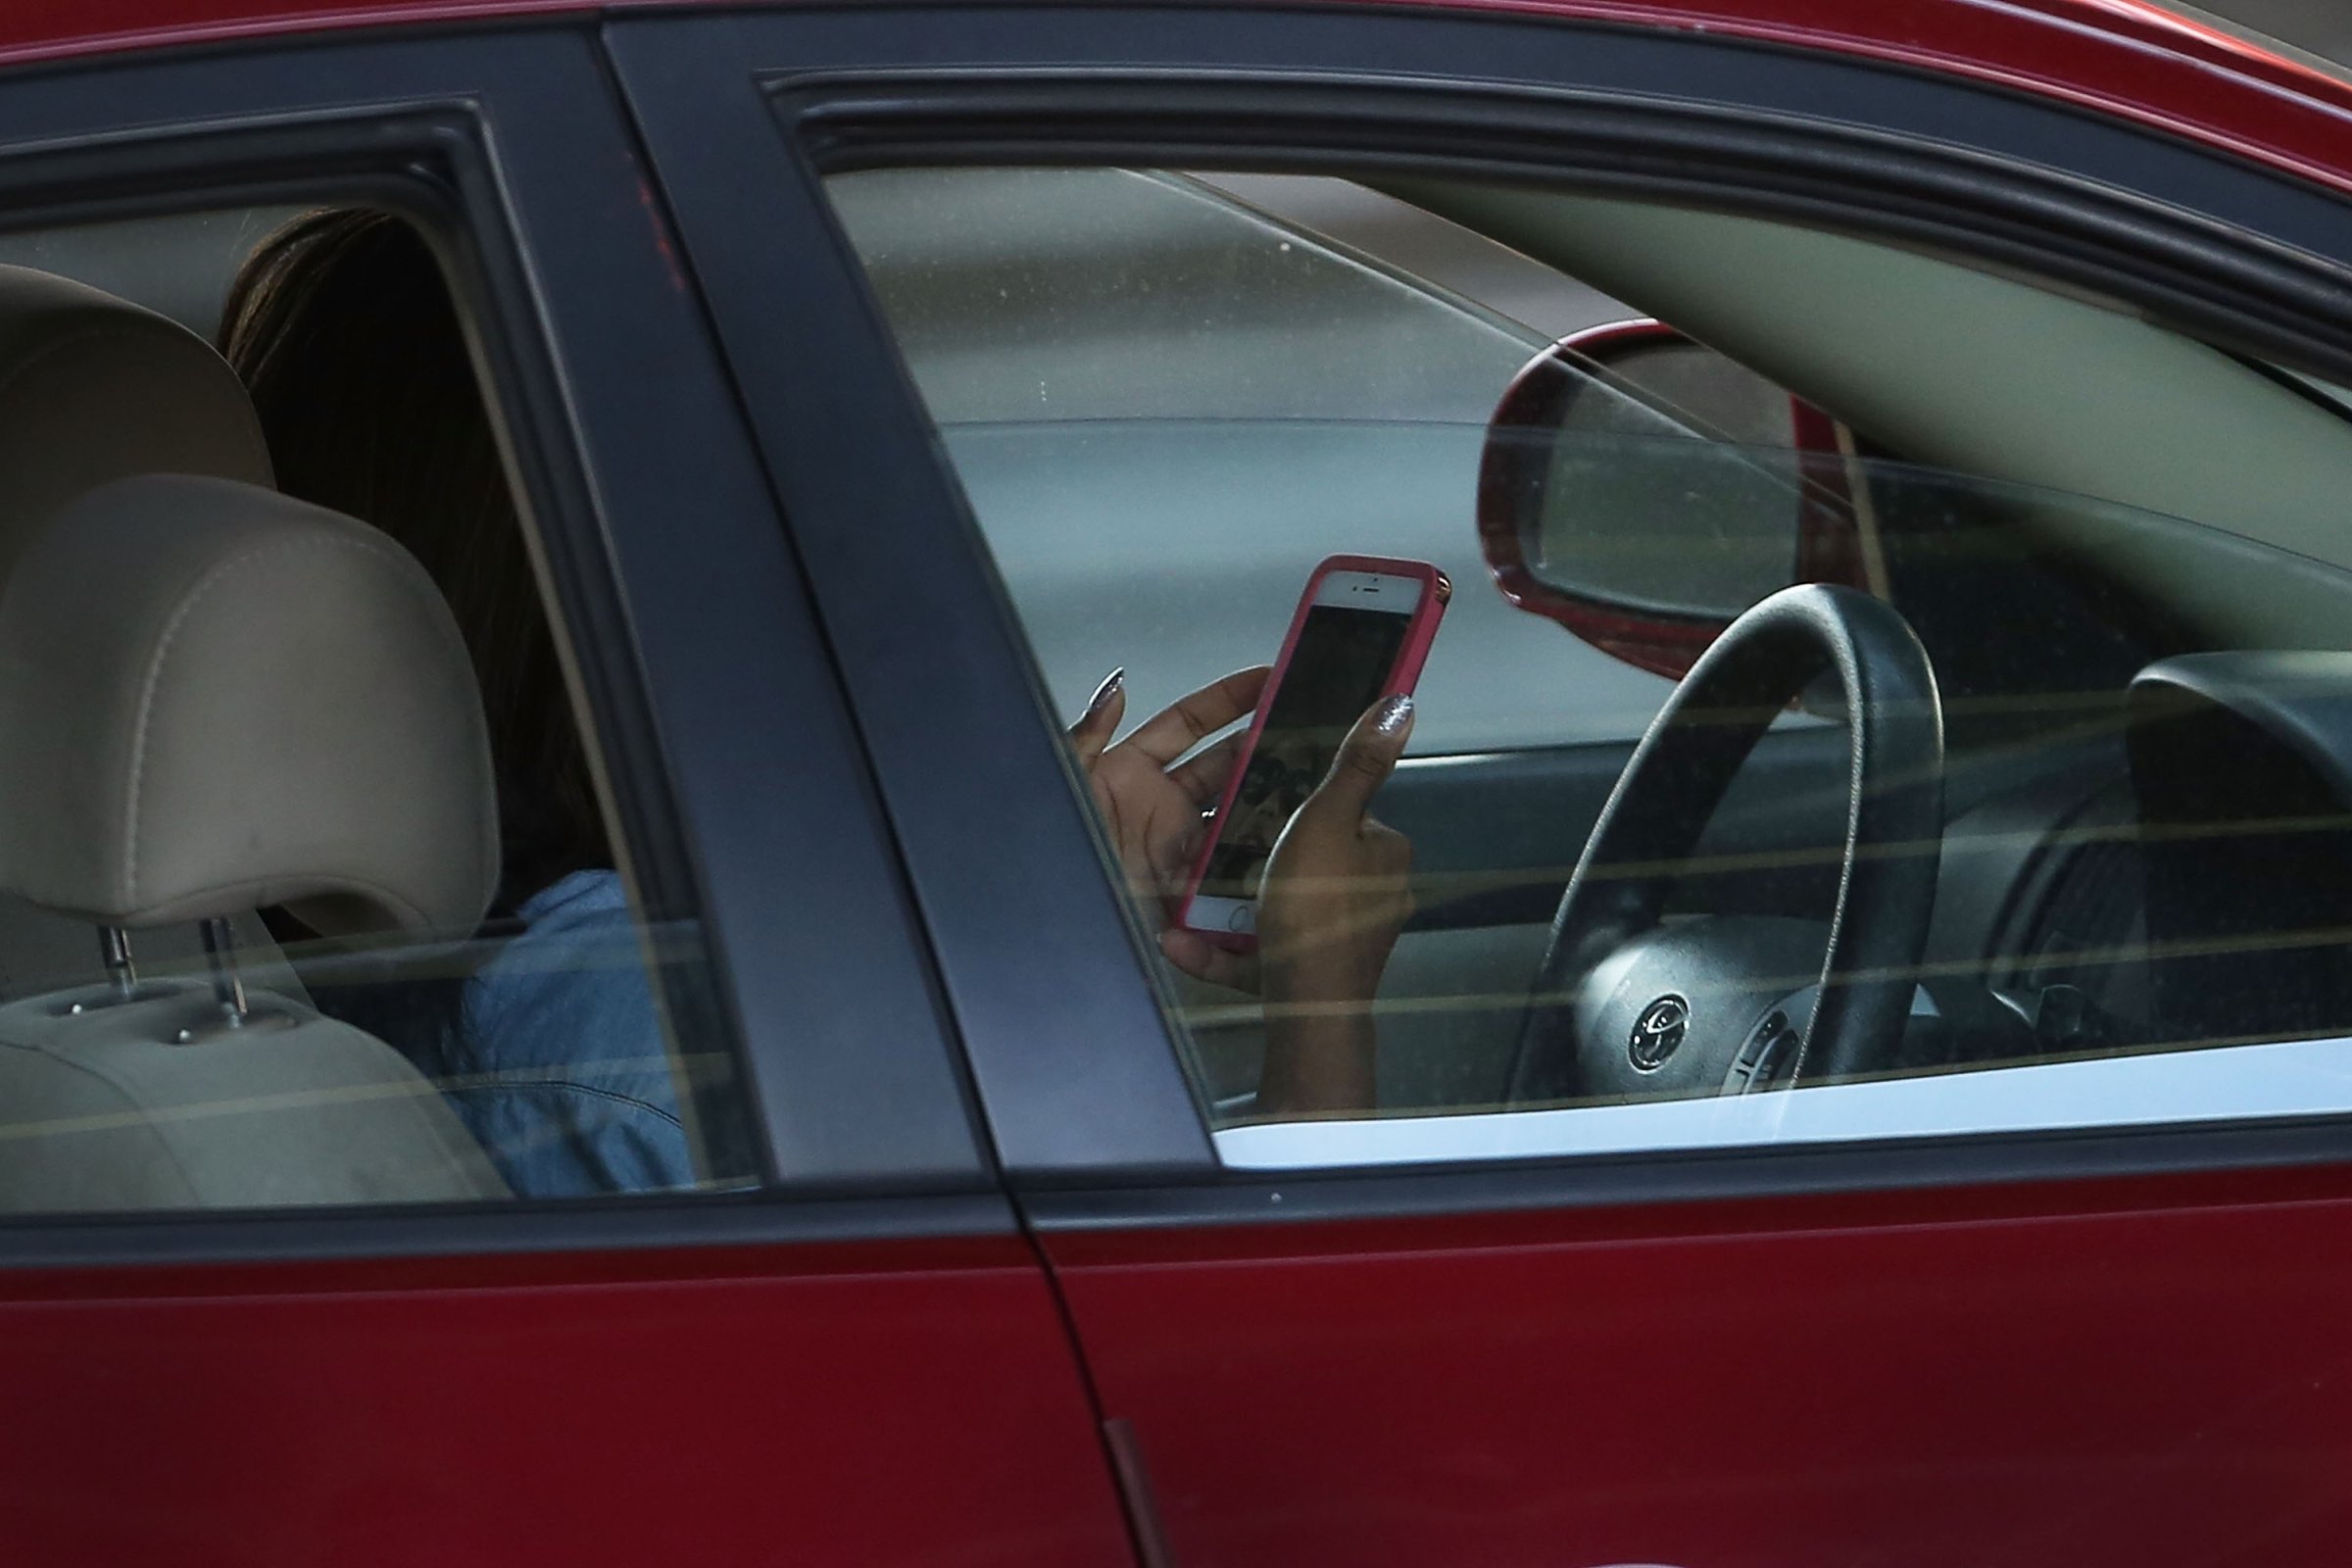 New Law Seeks to Crack Down on Distracted New York Drivers